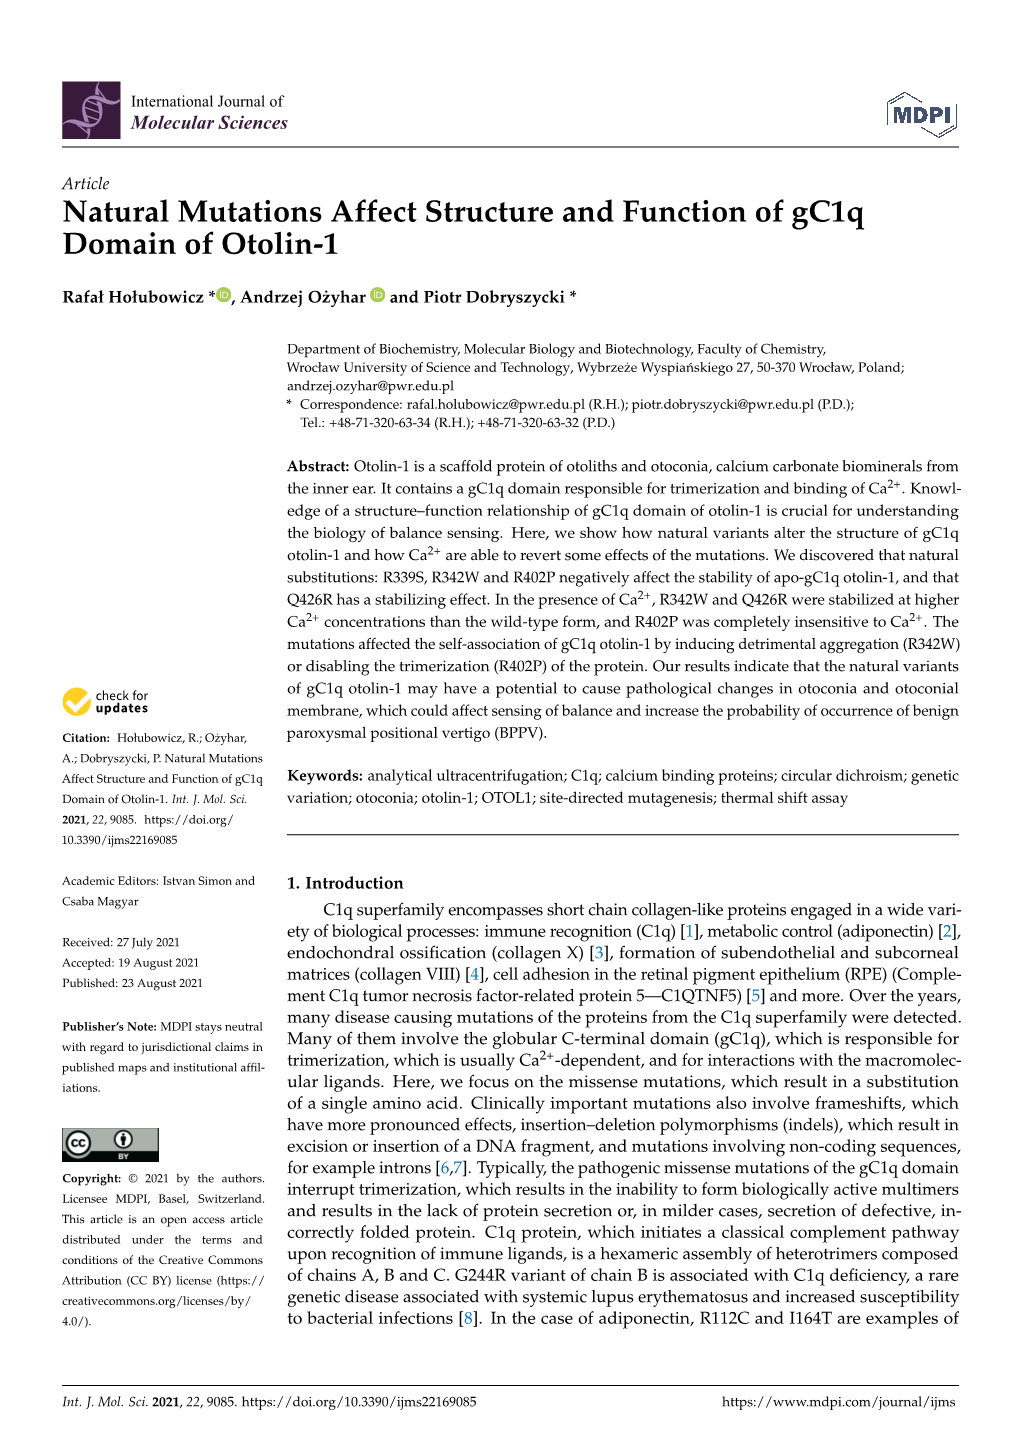 Natural Mutations Affect Structure and Function of Gc1q Domain of Otolin-1